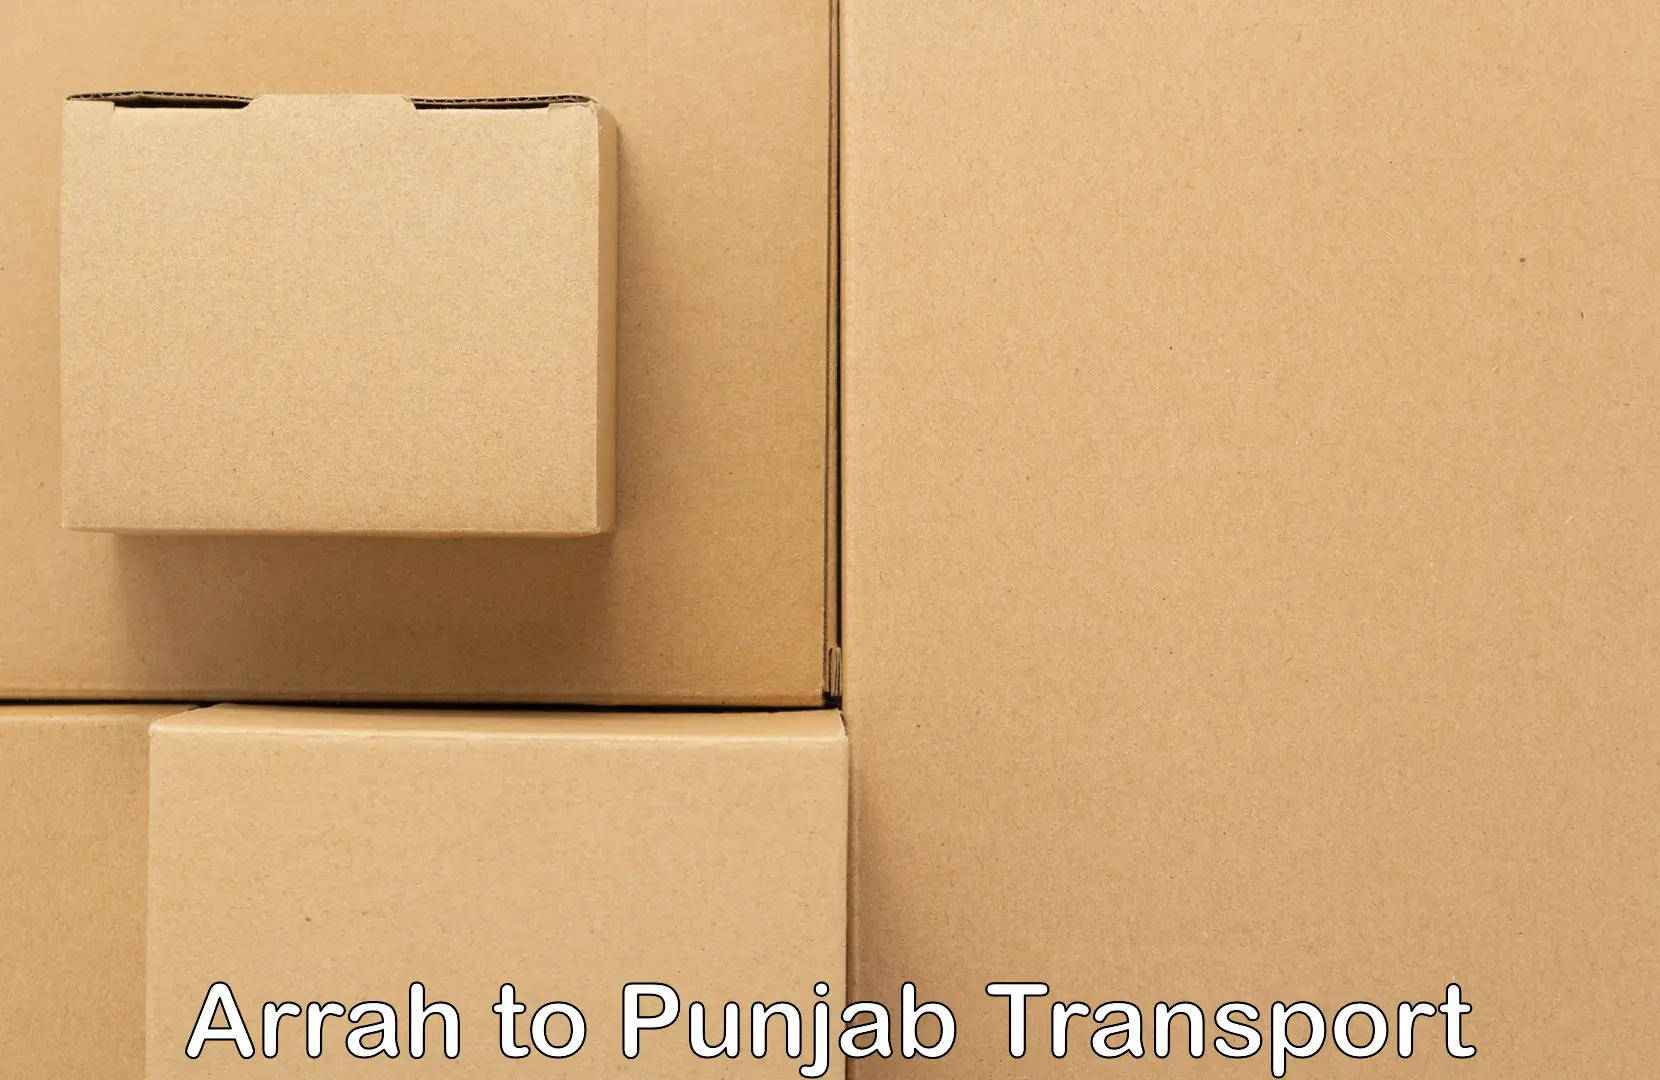 Daily parcel service transport in Arrah to Punjab Agricultural University Ludhiana